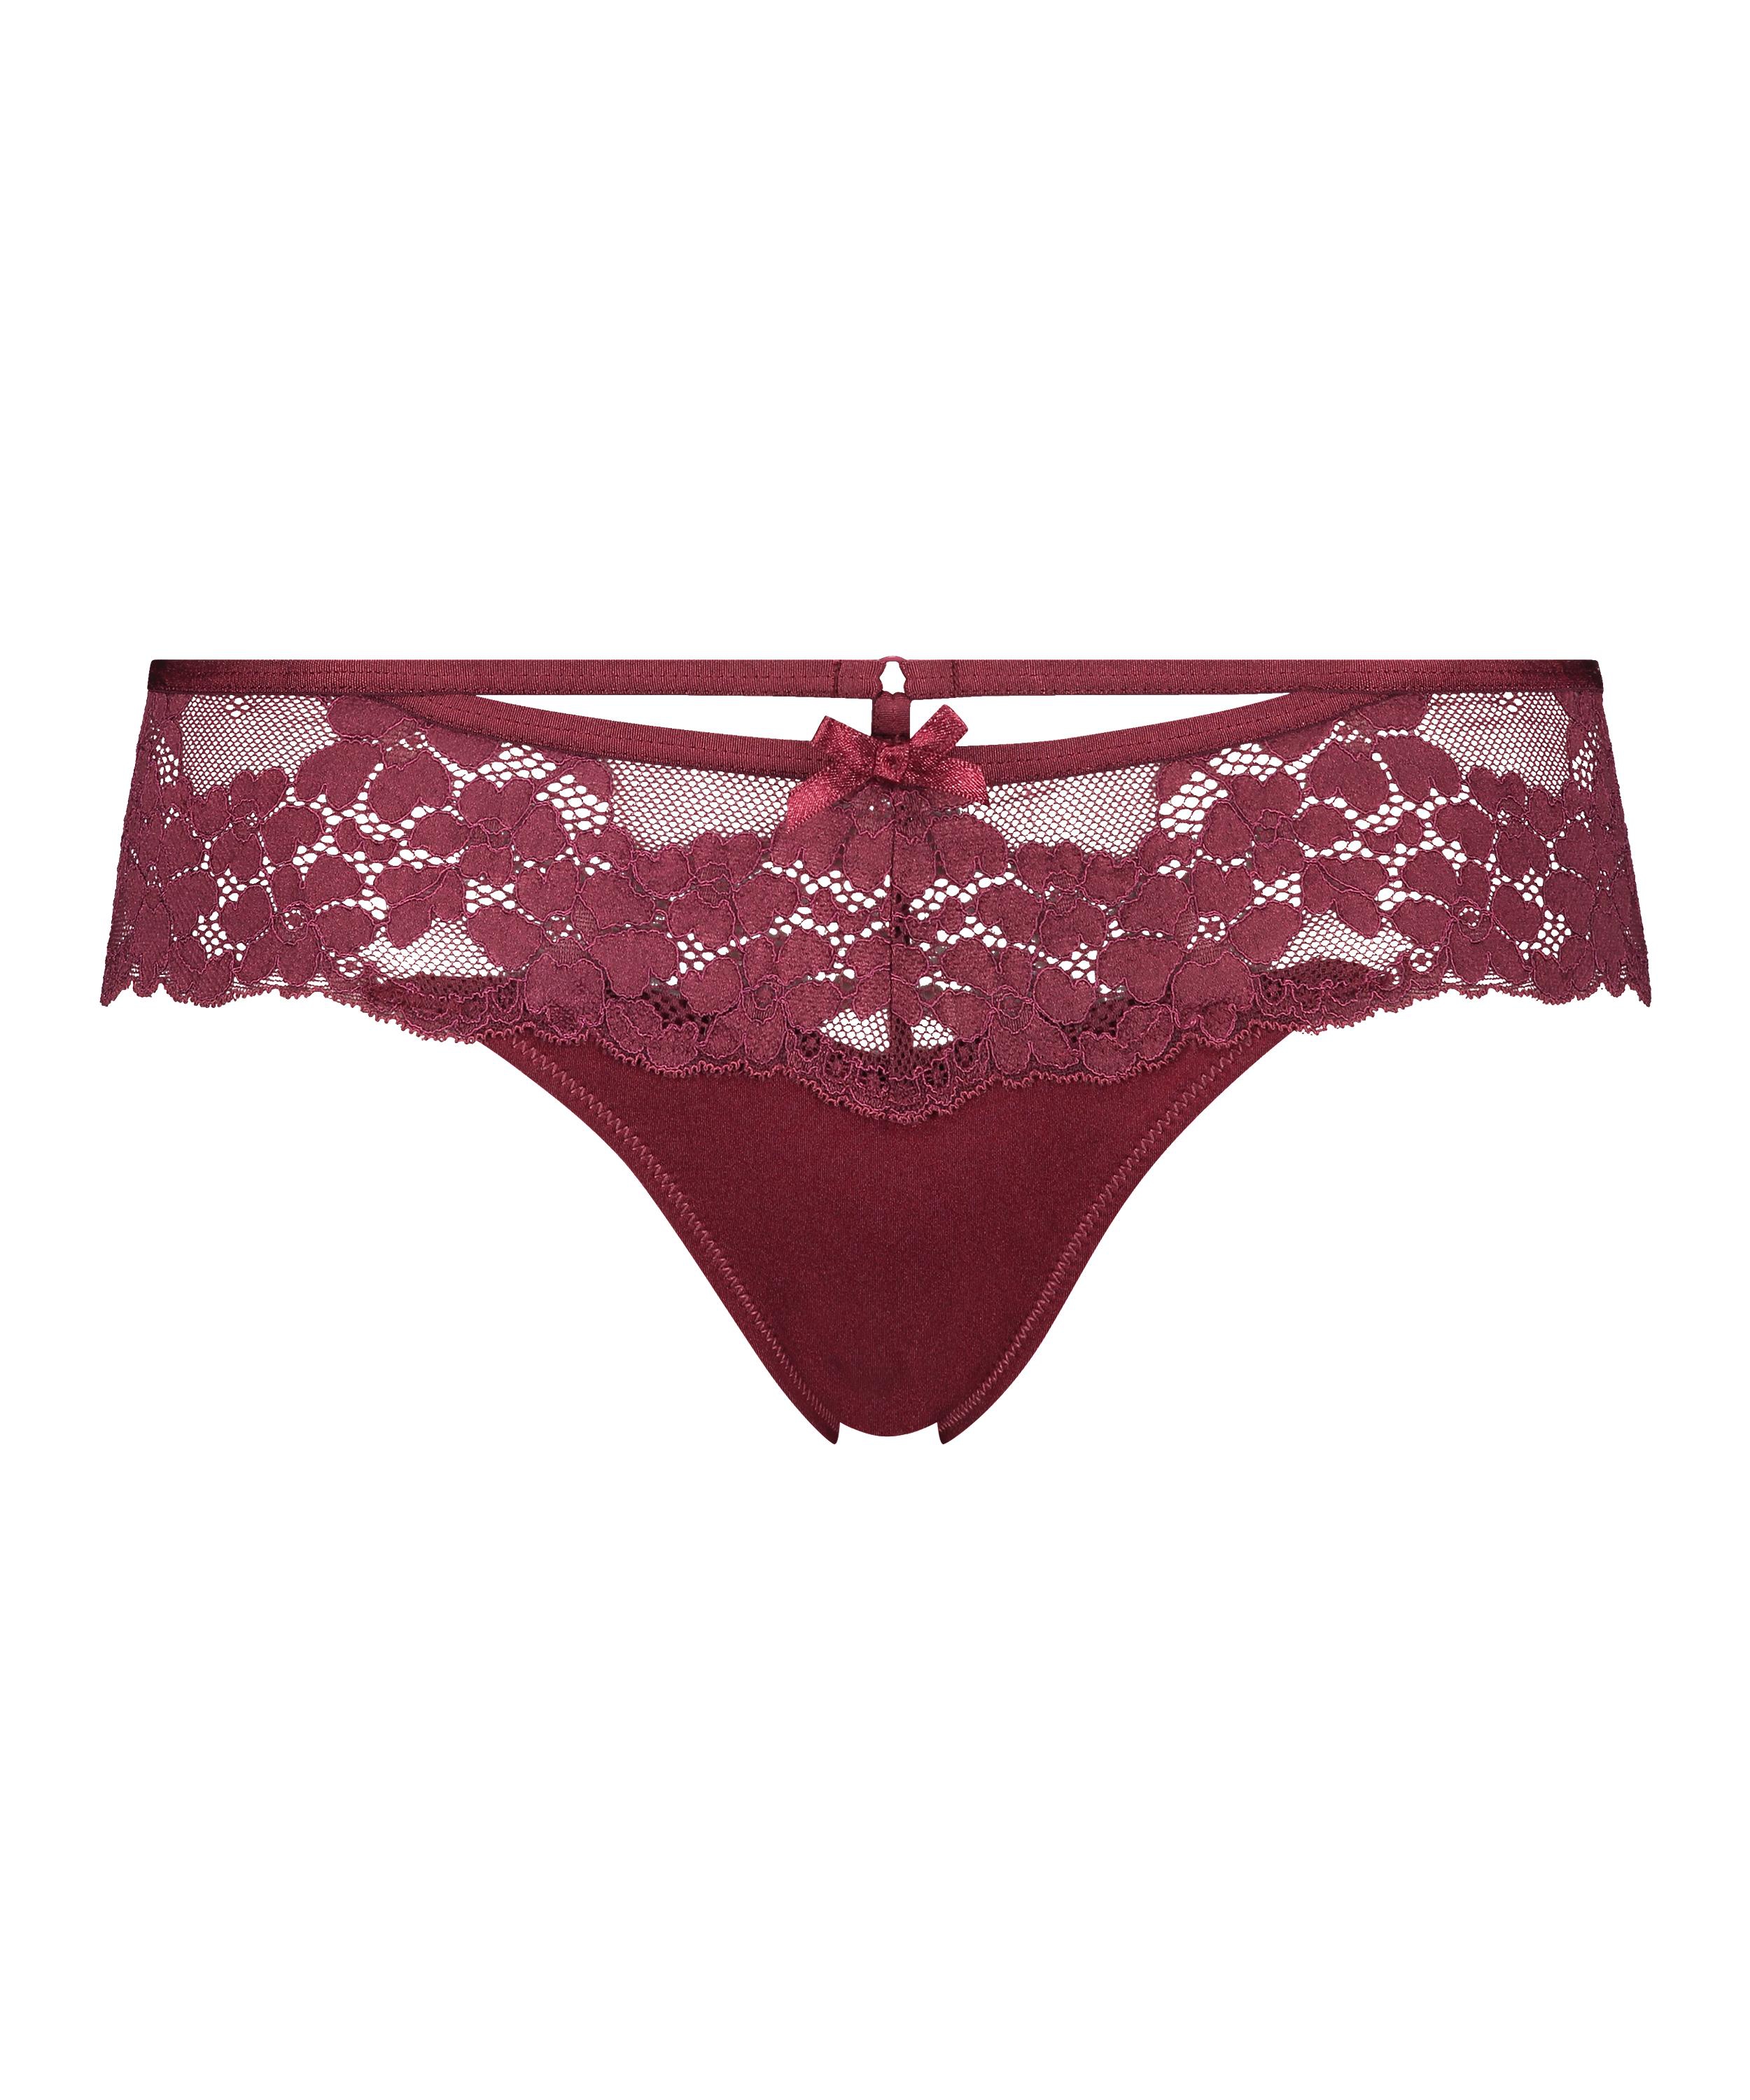 Boxerstring Nellie, Rood, main